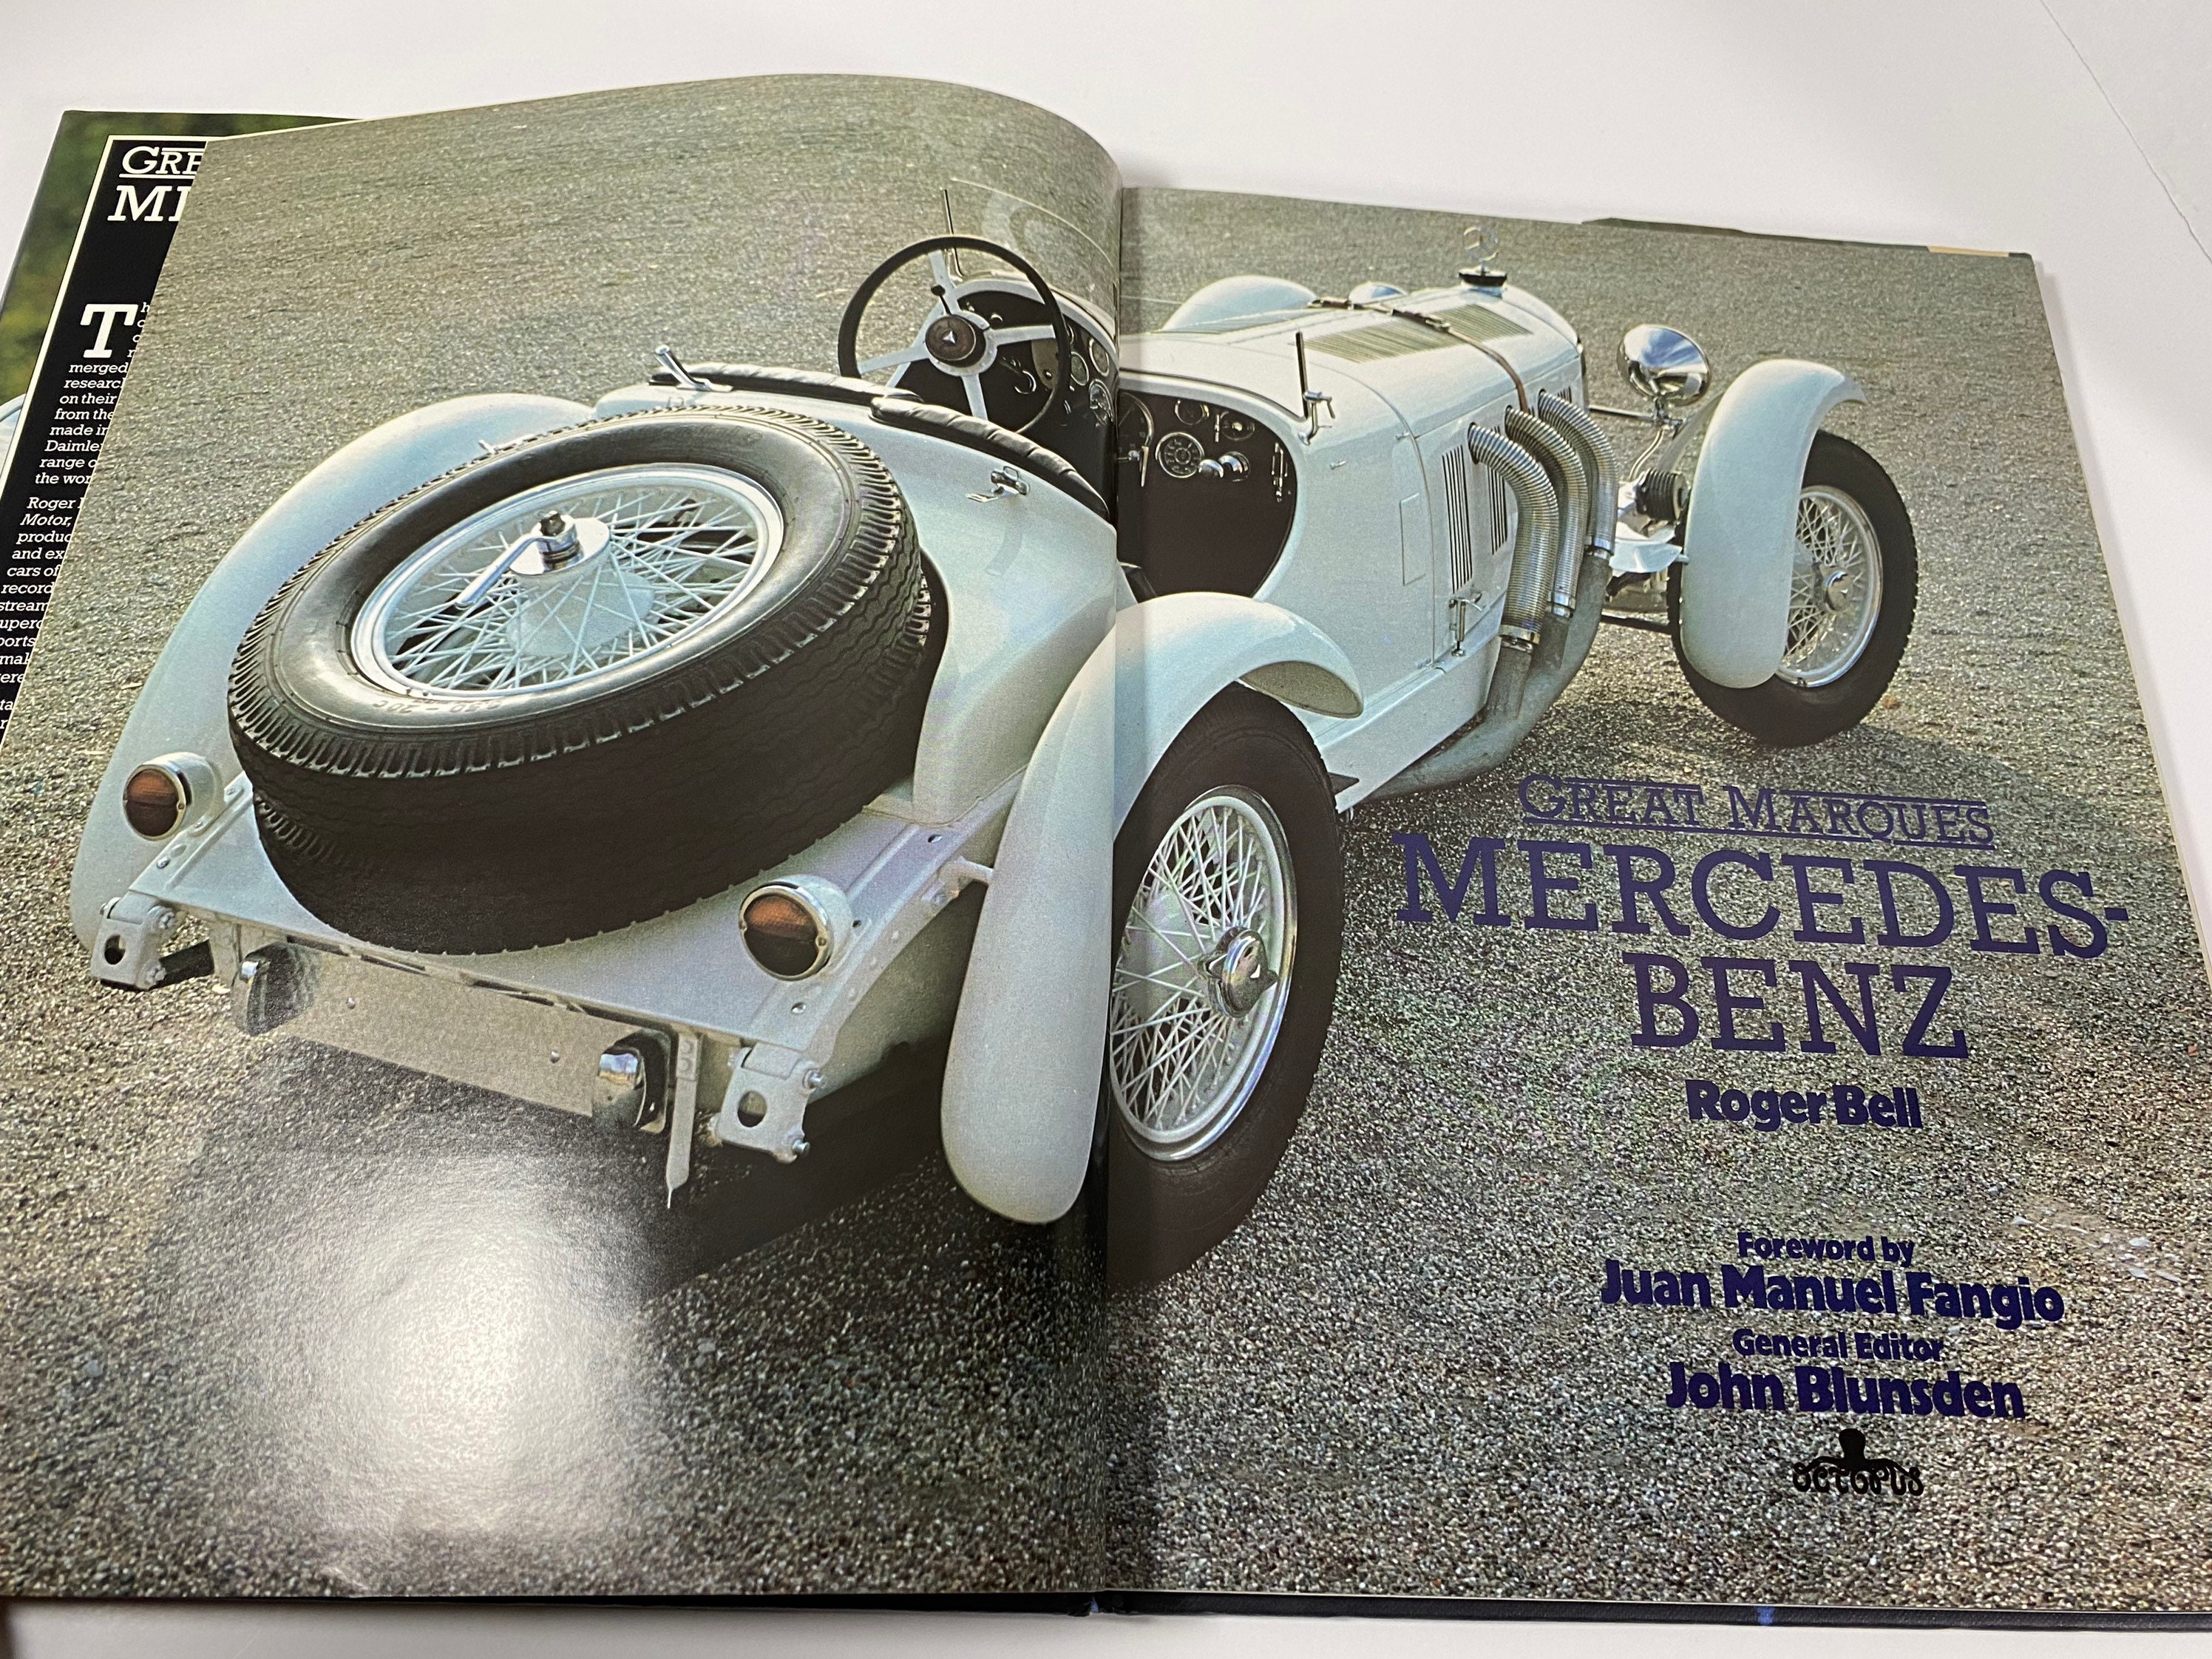 Vintage 1980 Great Marques Mercedes-benz hardcover With Original Dust  Jacket By: Roger Bell & John Blunsden Coffee Table Book/gift -  Israel